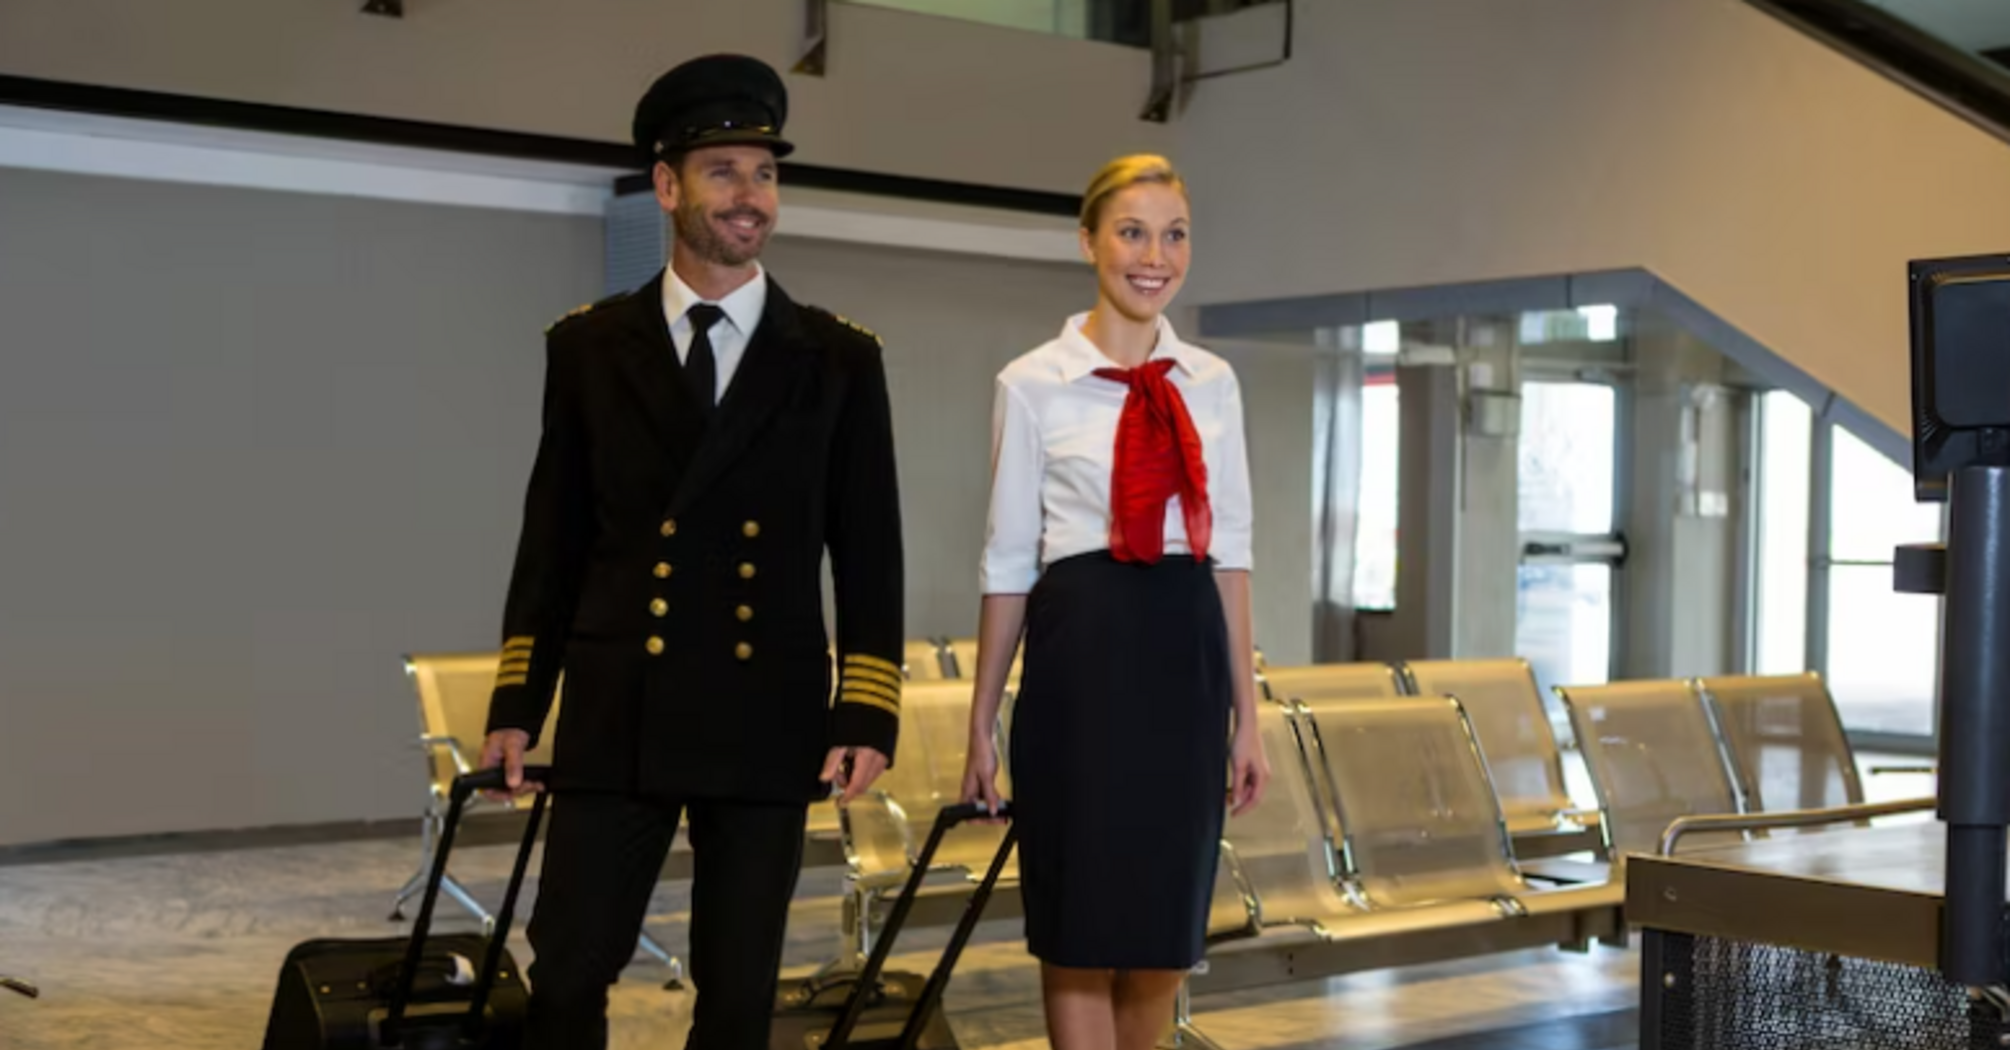 What passenger habits annoy the cabin crew